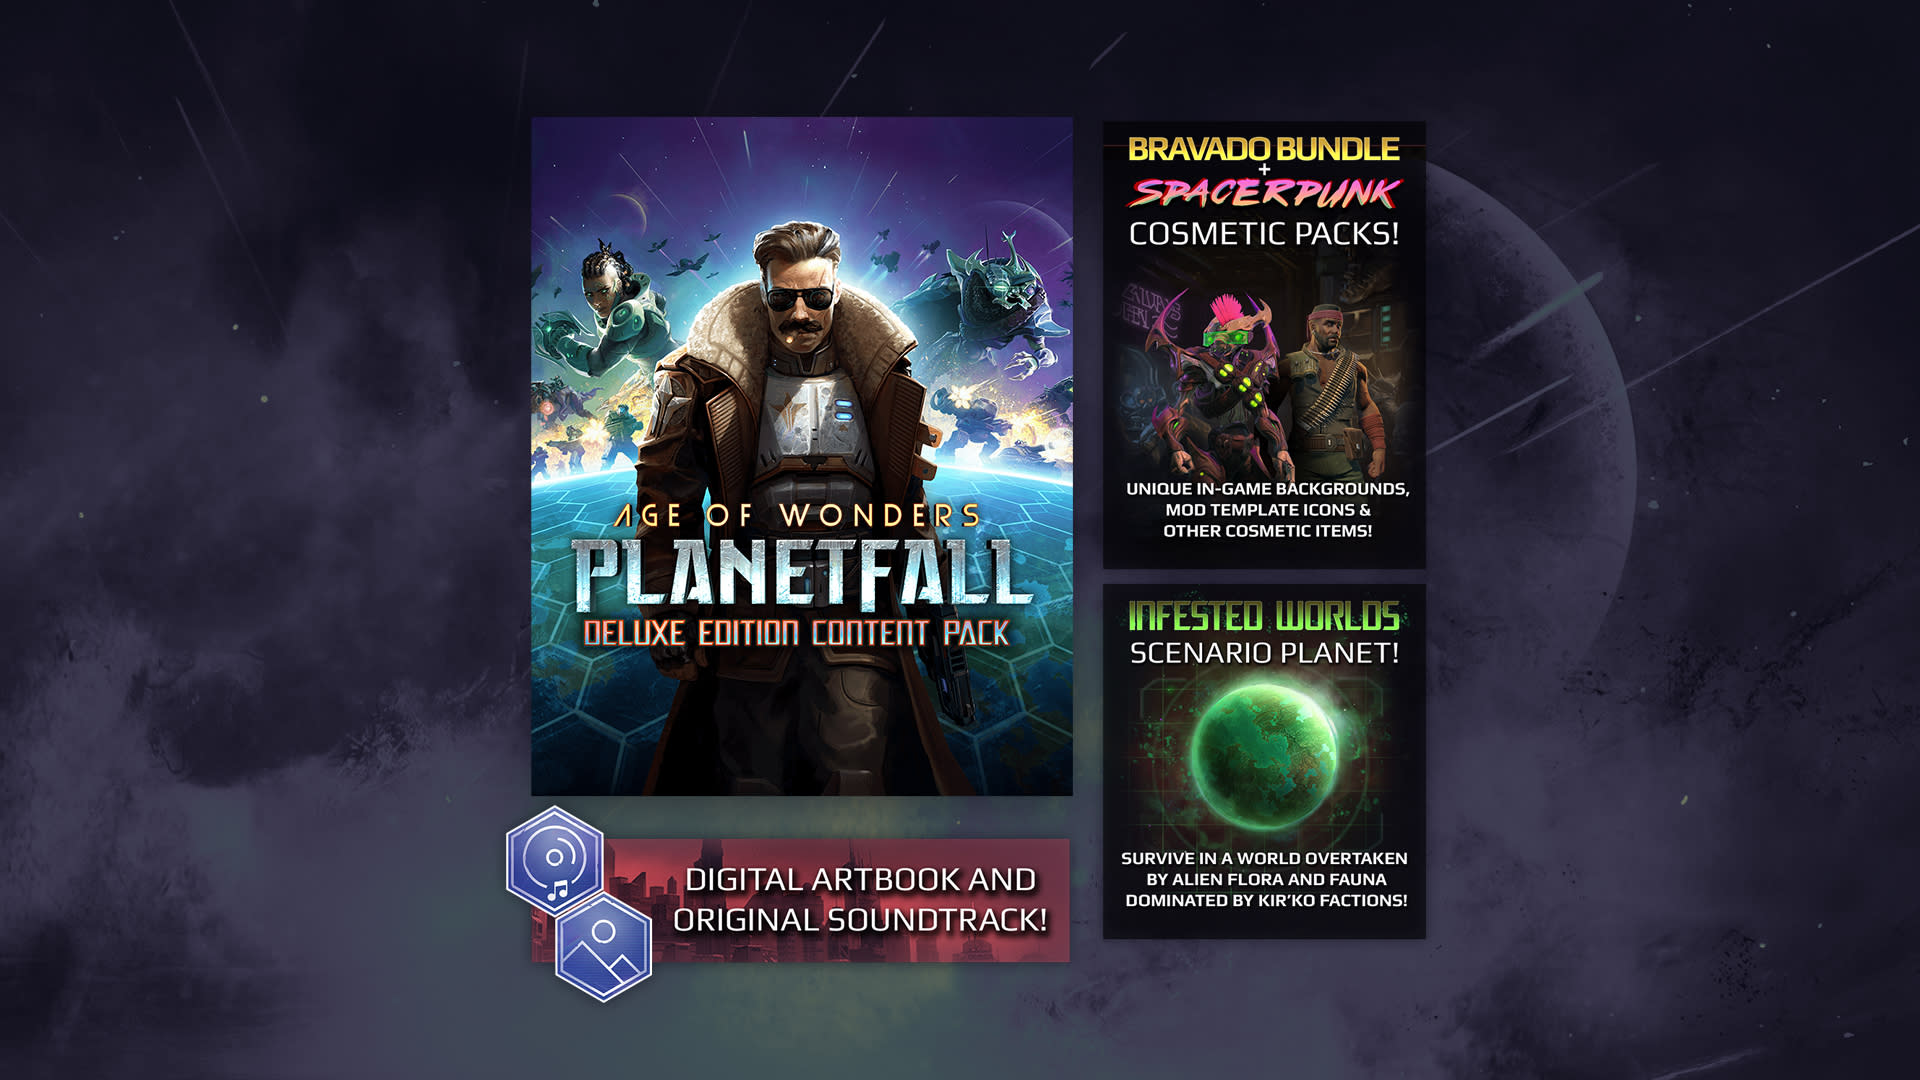 Age of Wonders: Planetfall Deluxe Edition Content Pack (screenshot 1)